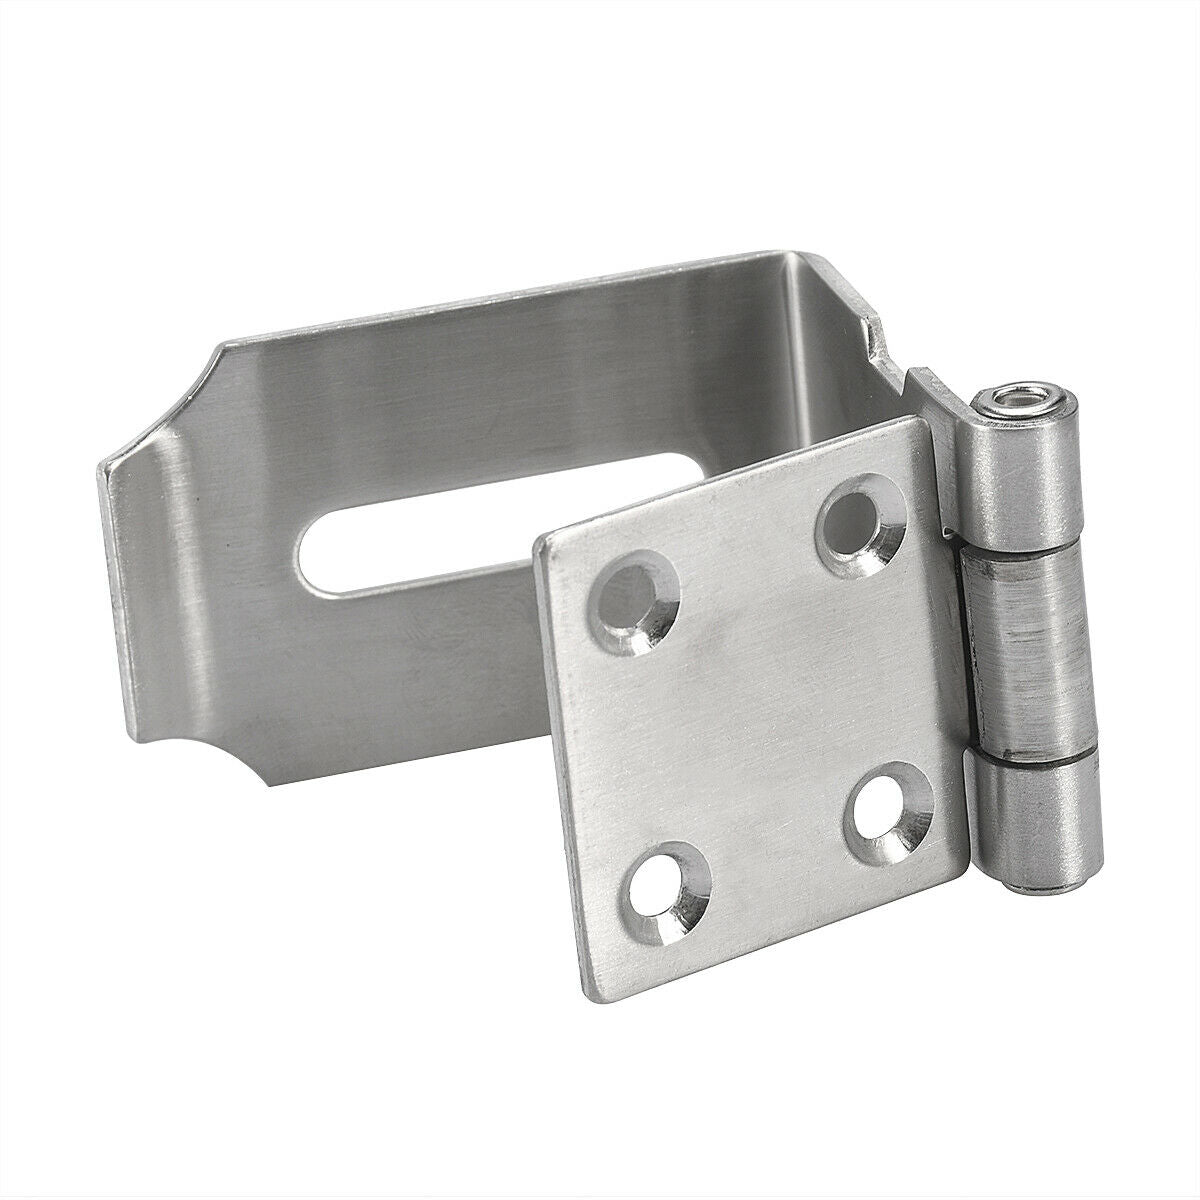 Safety Hasp Clasp Gate Door Shed Latch Lock Box Padlock Stainless Steel US HN